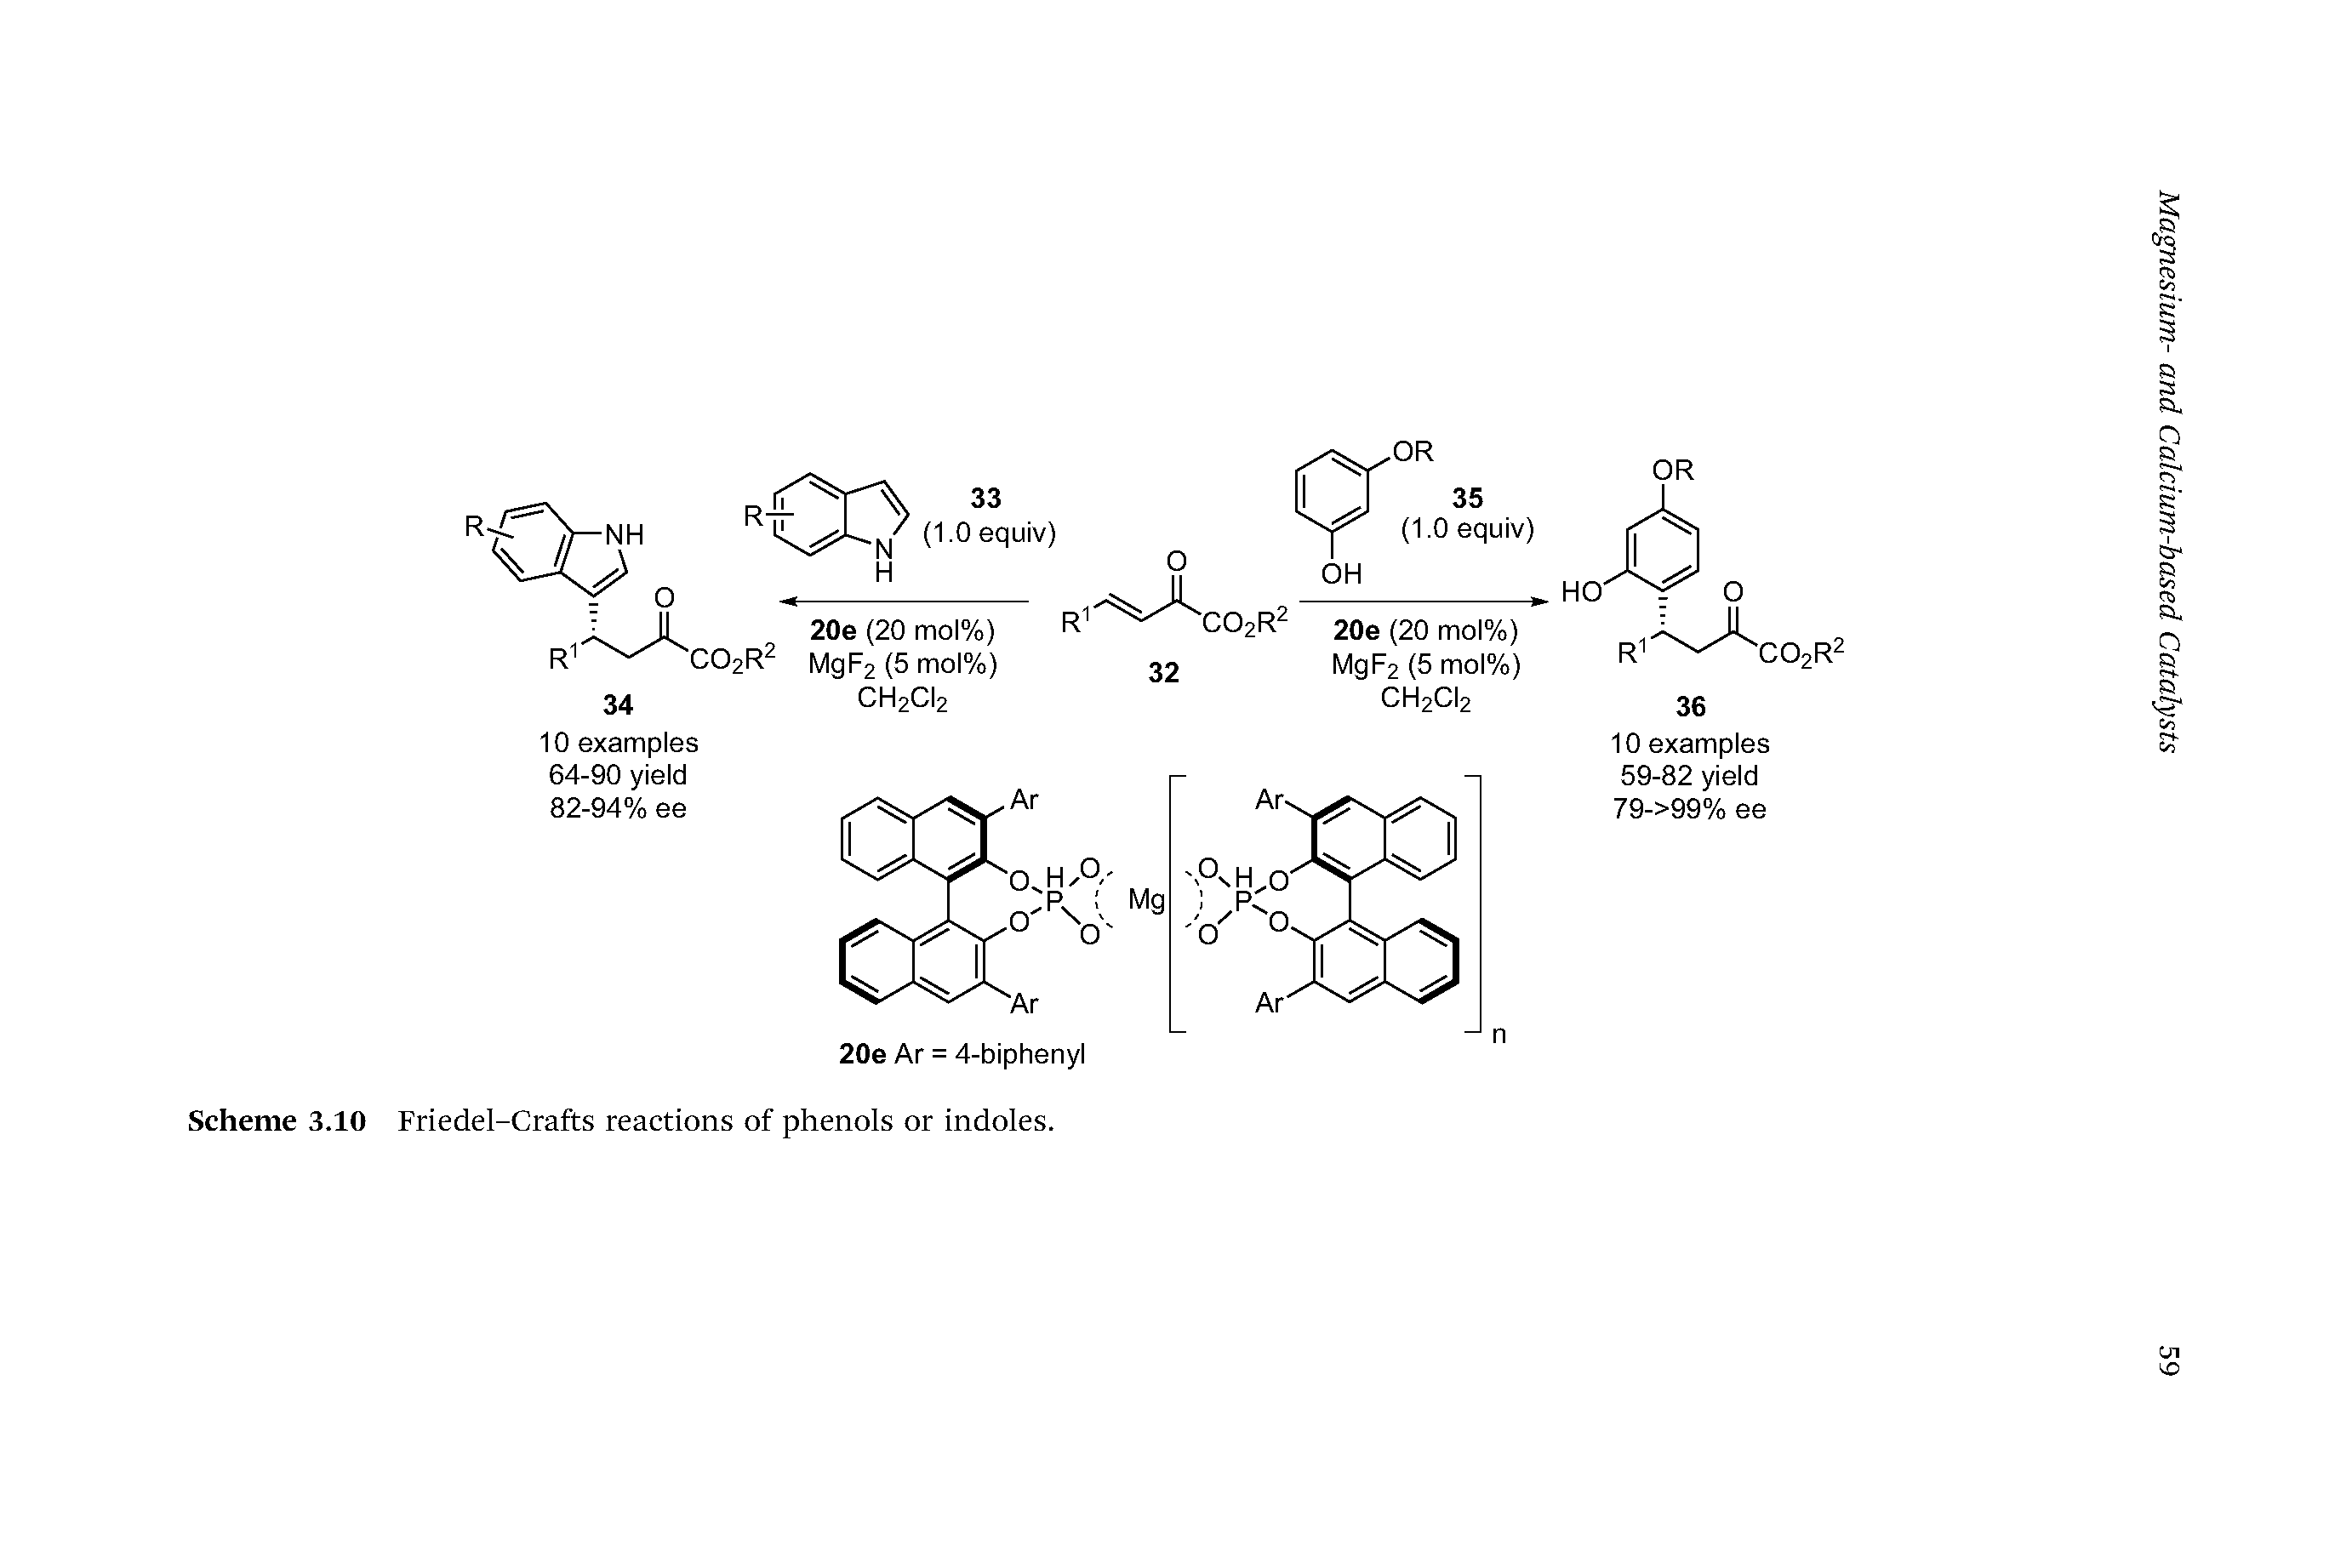 Scheme 3.10 Friedel-Crafts reactions of phenols or indoles.